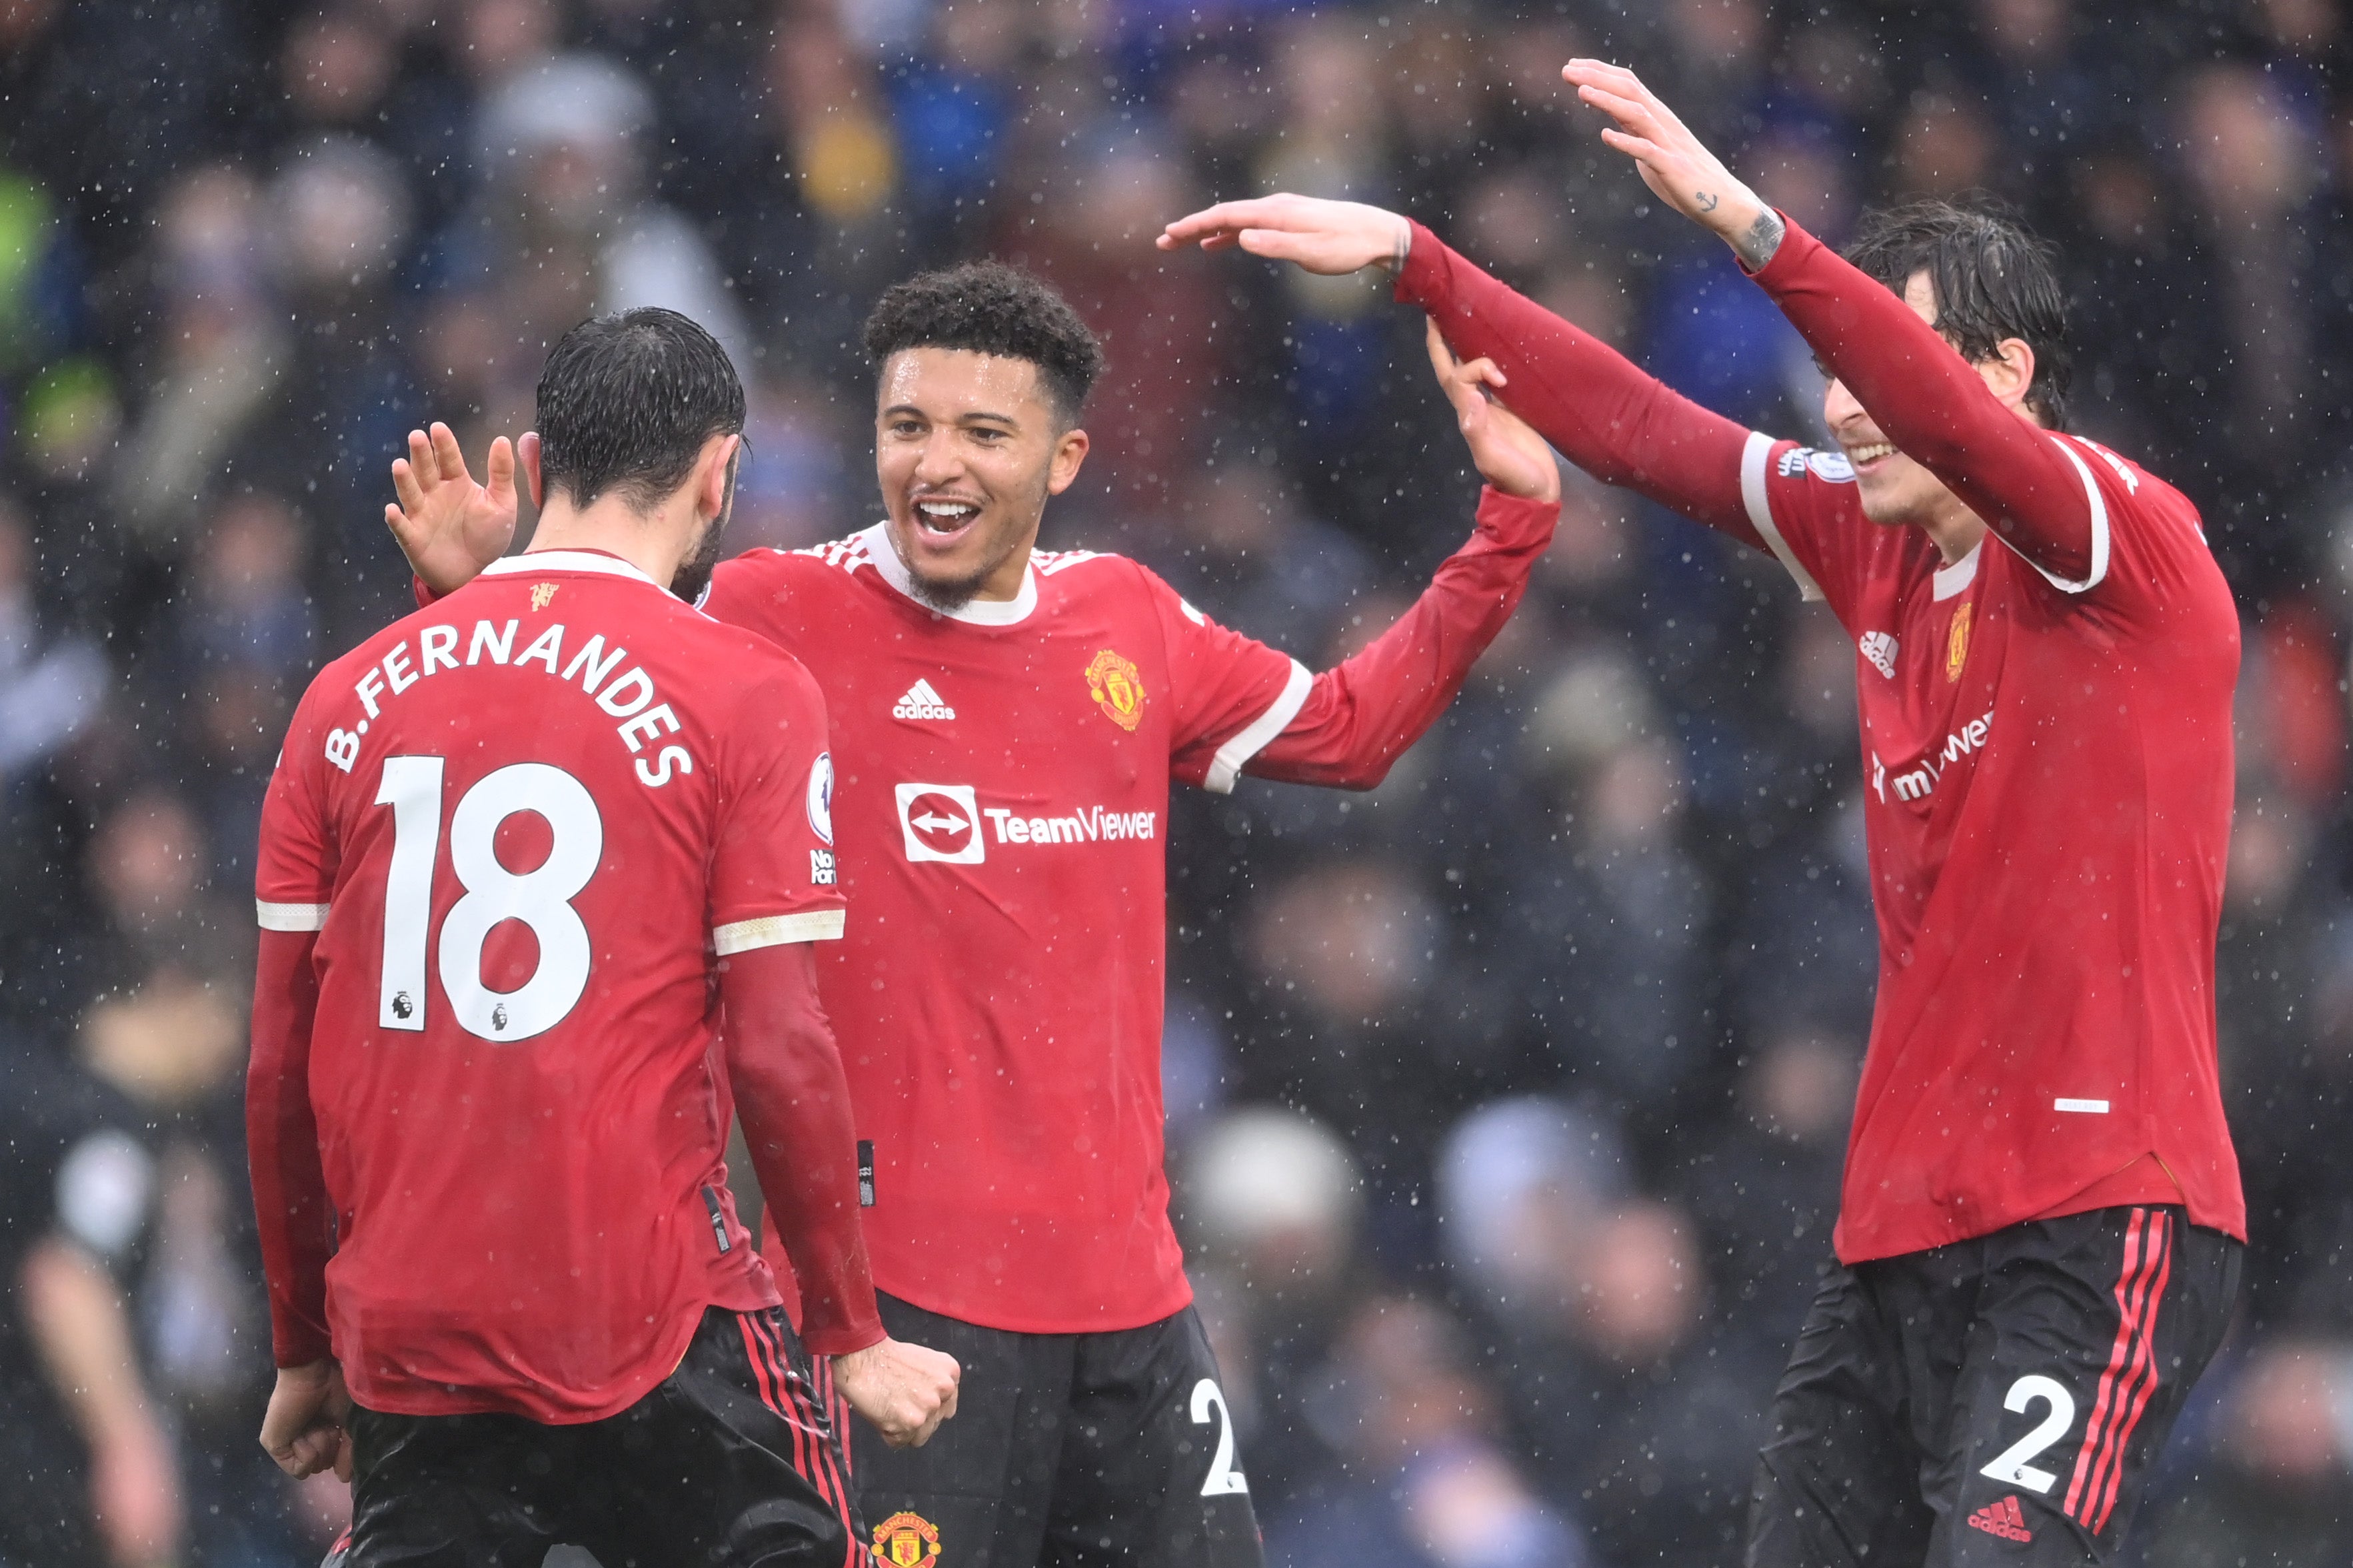 Manchester United rise above the storm in throwback Premier League